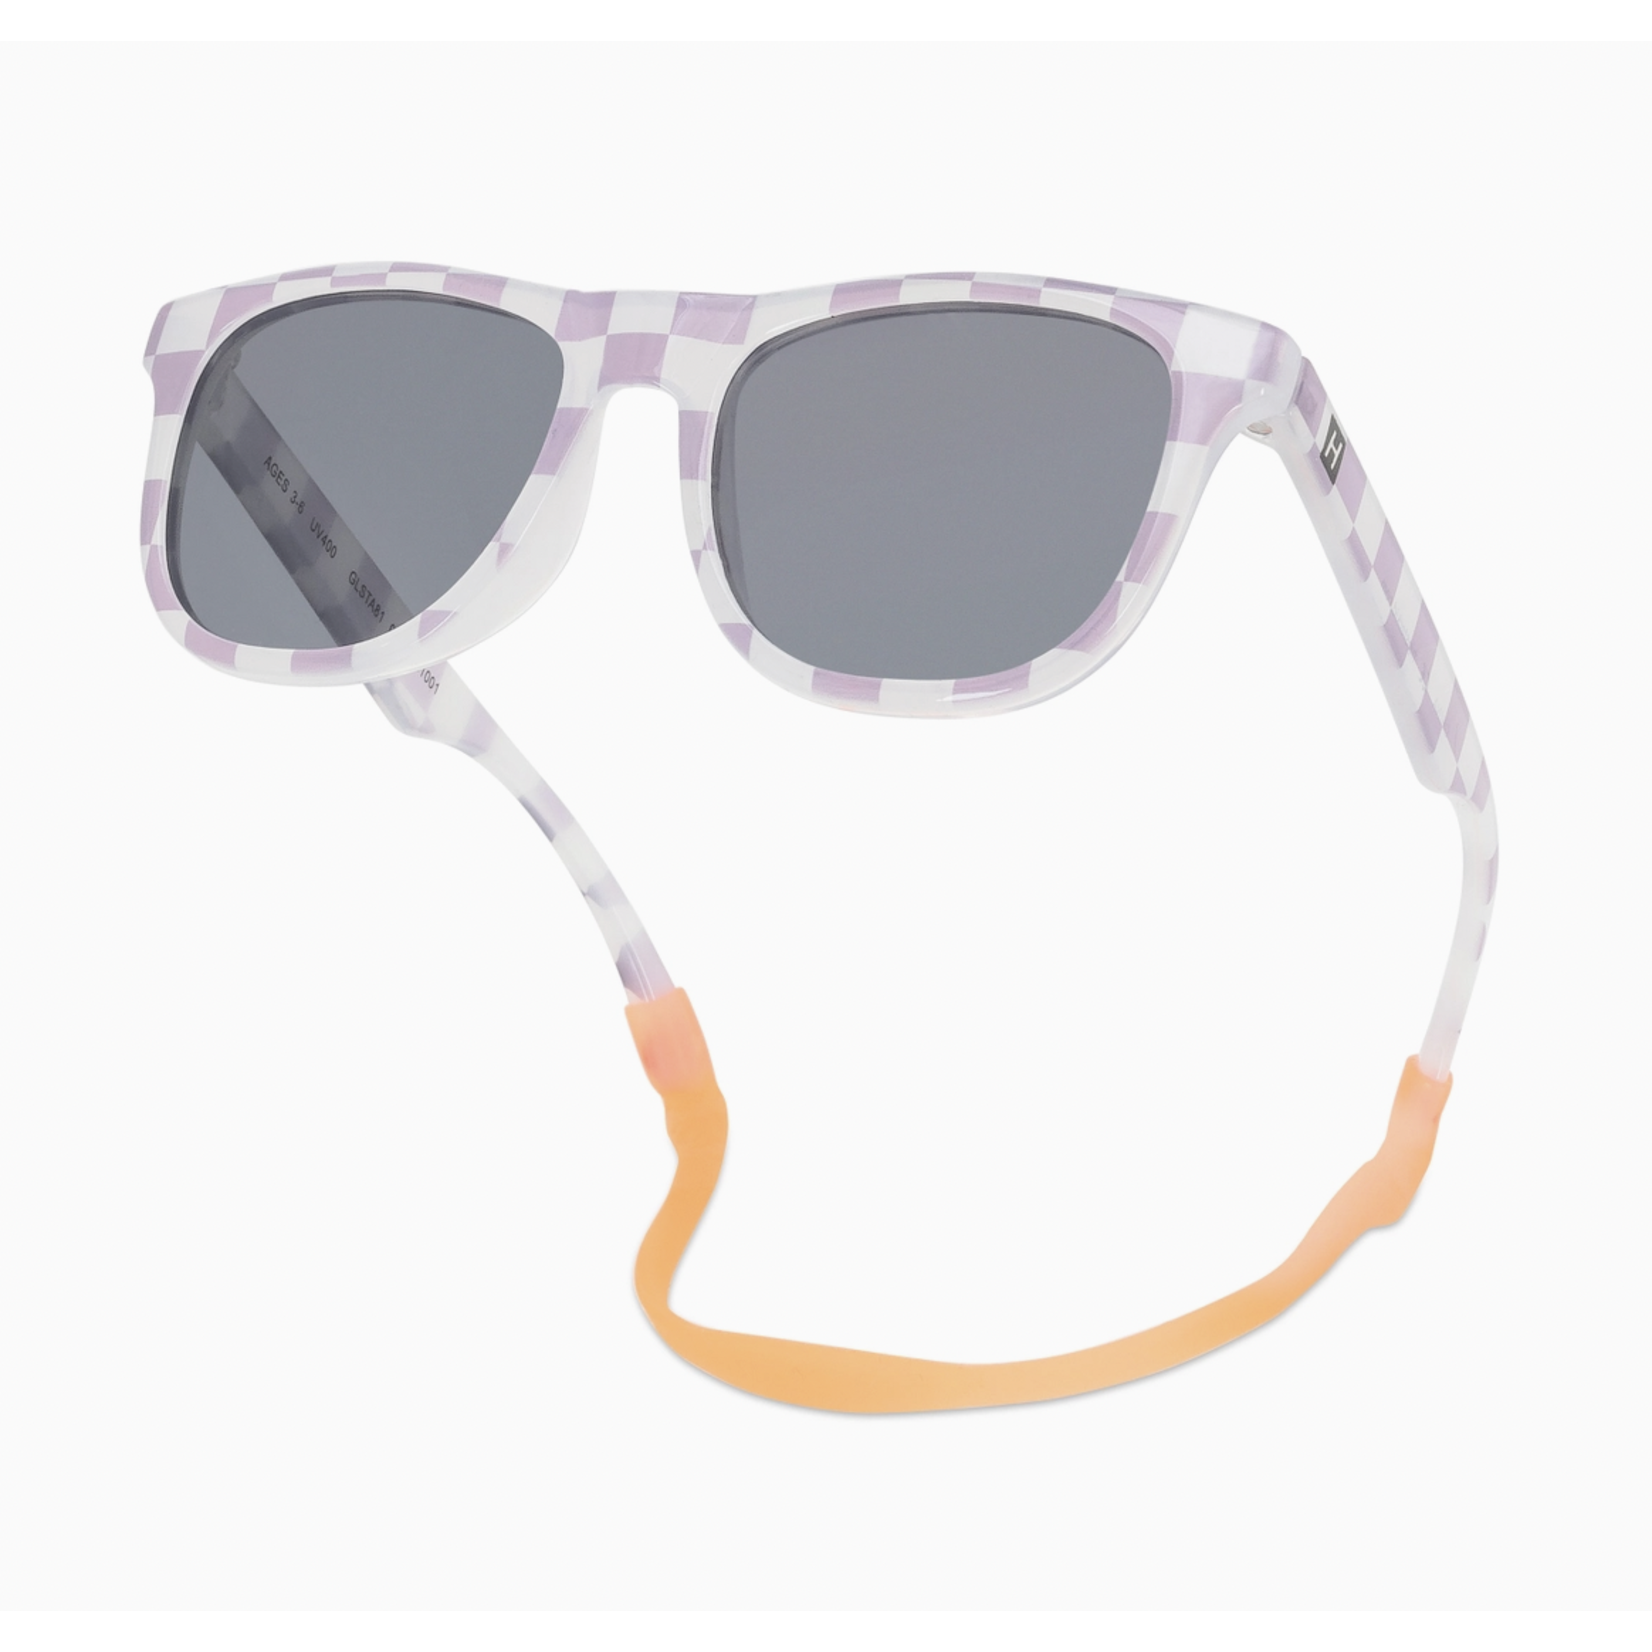 Hipsterkid Extra Fancy Sunglasses - Periwinkle + White Check